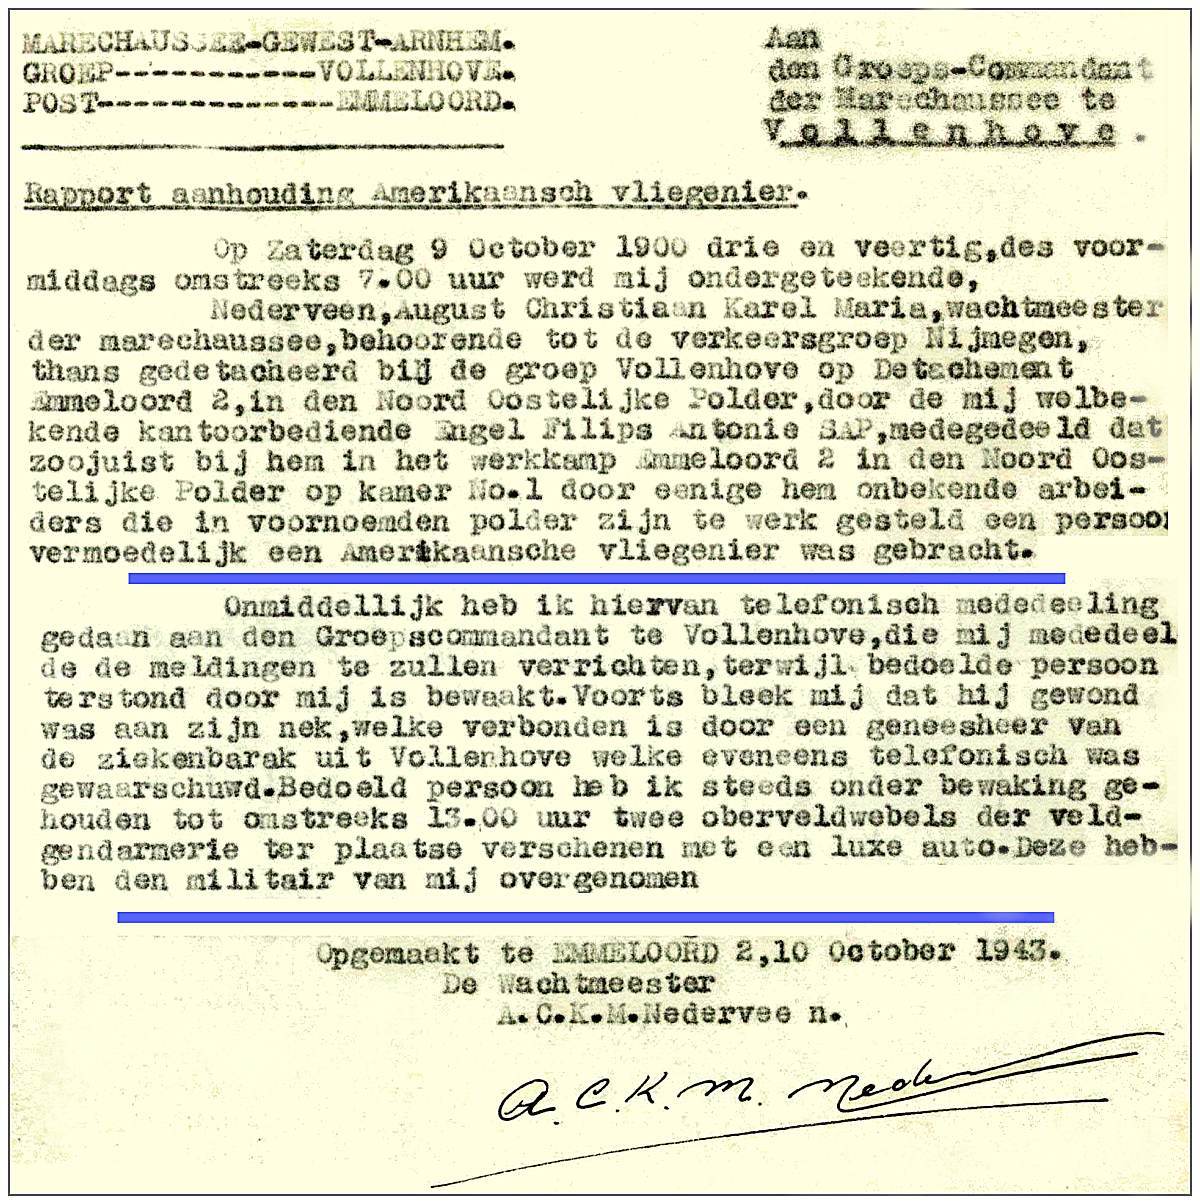 Snippets from police report - Nederveen, Emmeloord 2 - 10 Oct 1943